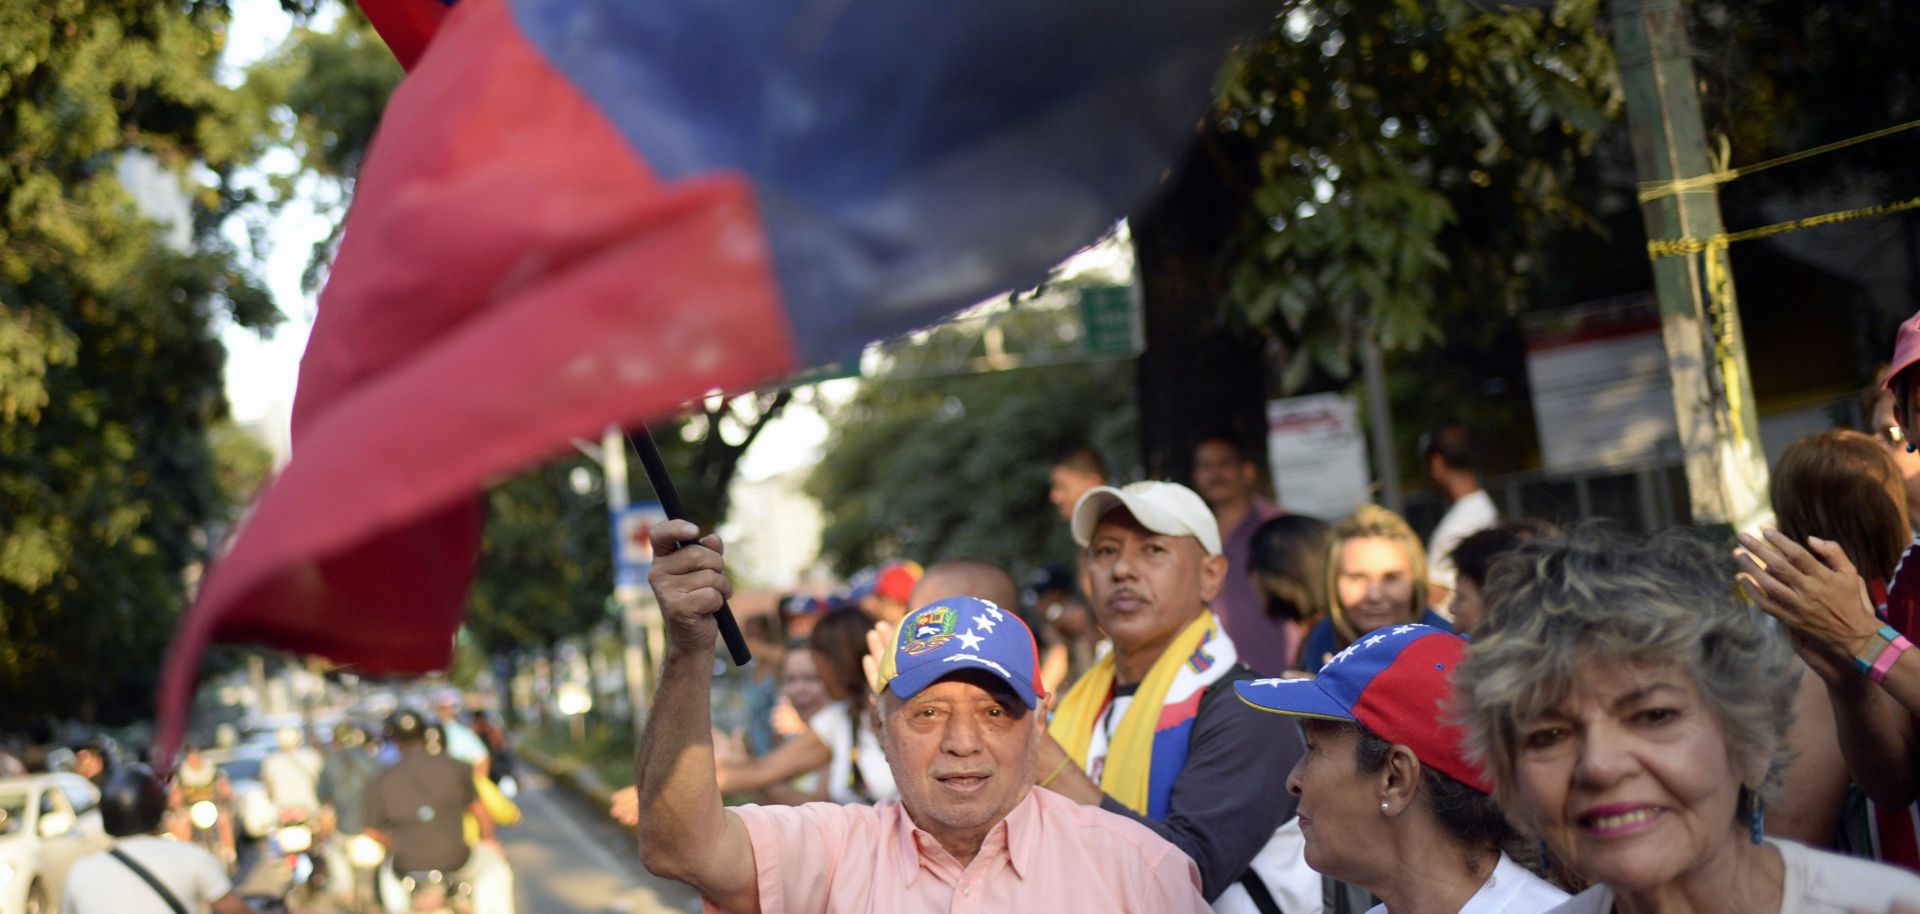 Opponents of Venezuela's constitutional assembly rally in Caracas after a symbolic vote against the measure. The vote to authorize the body that will rewrite the country's constitution will be held July 30.